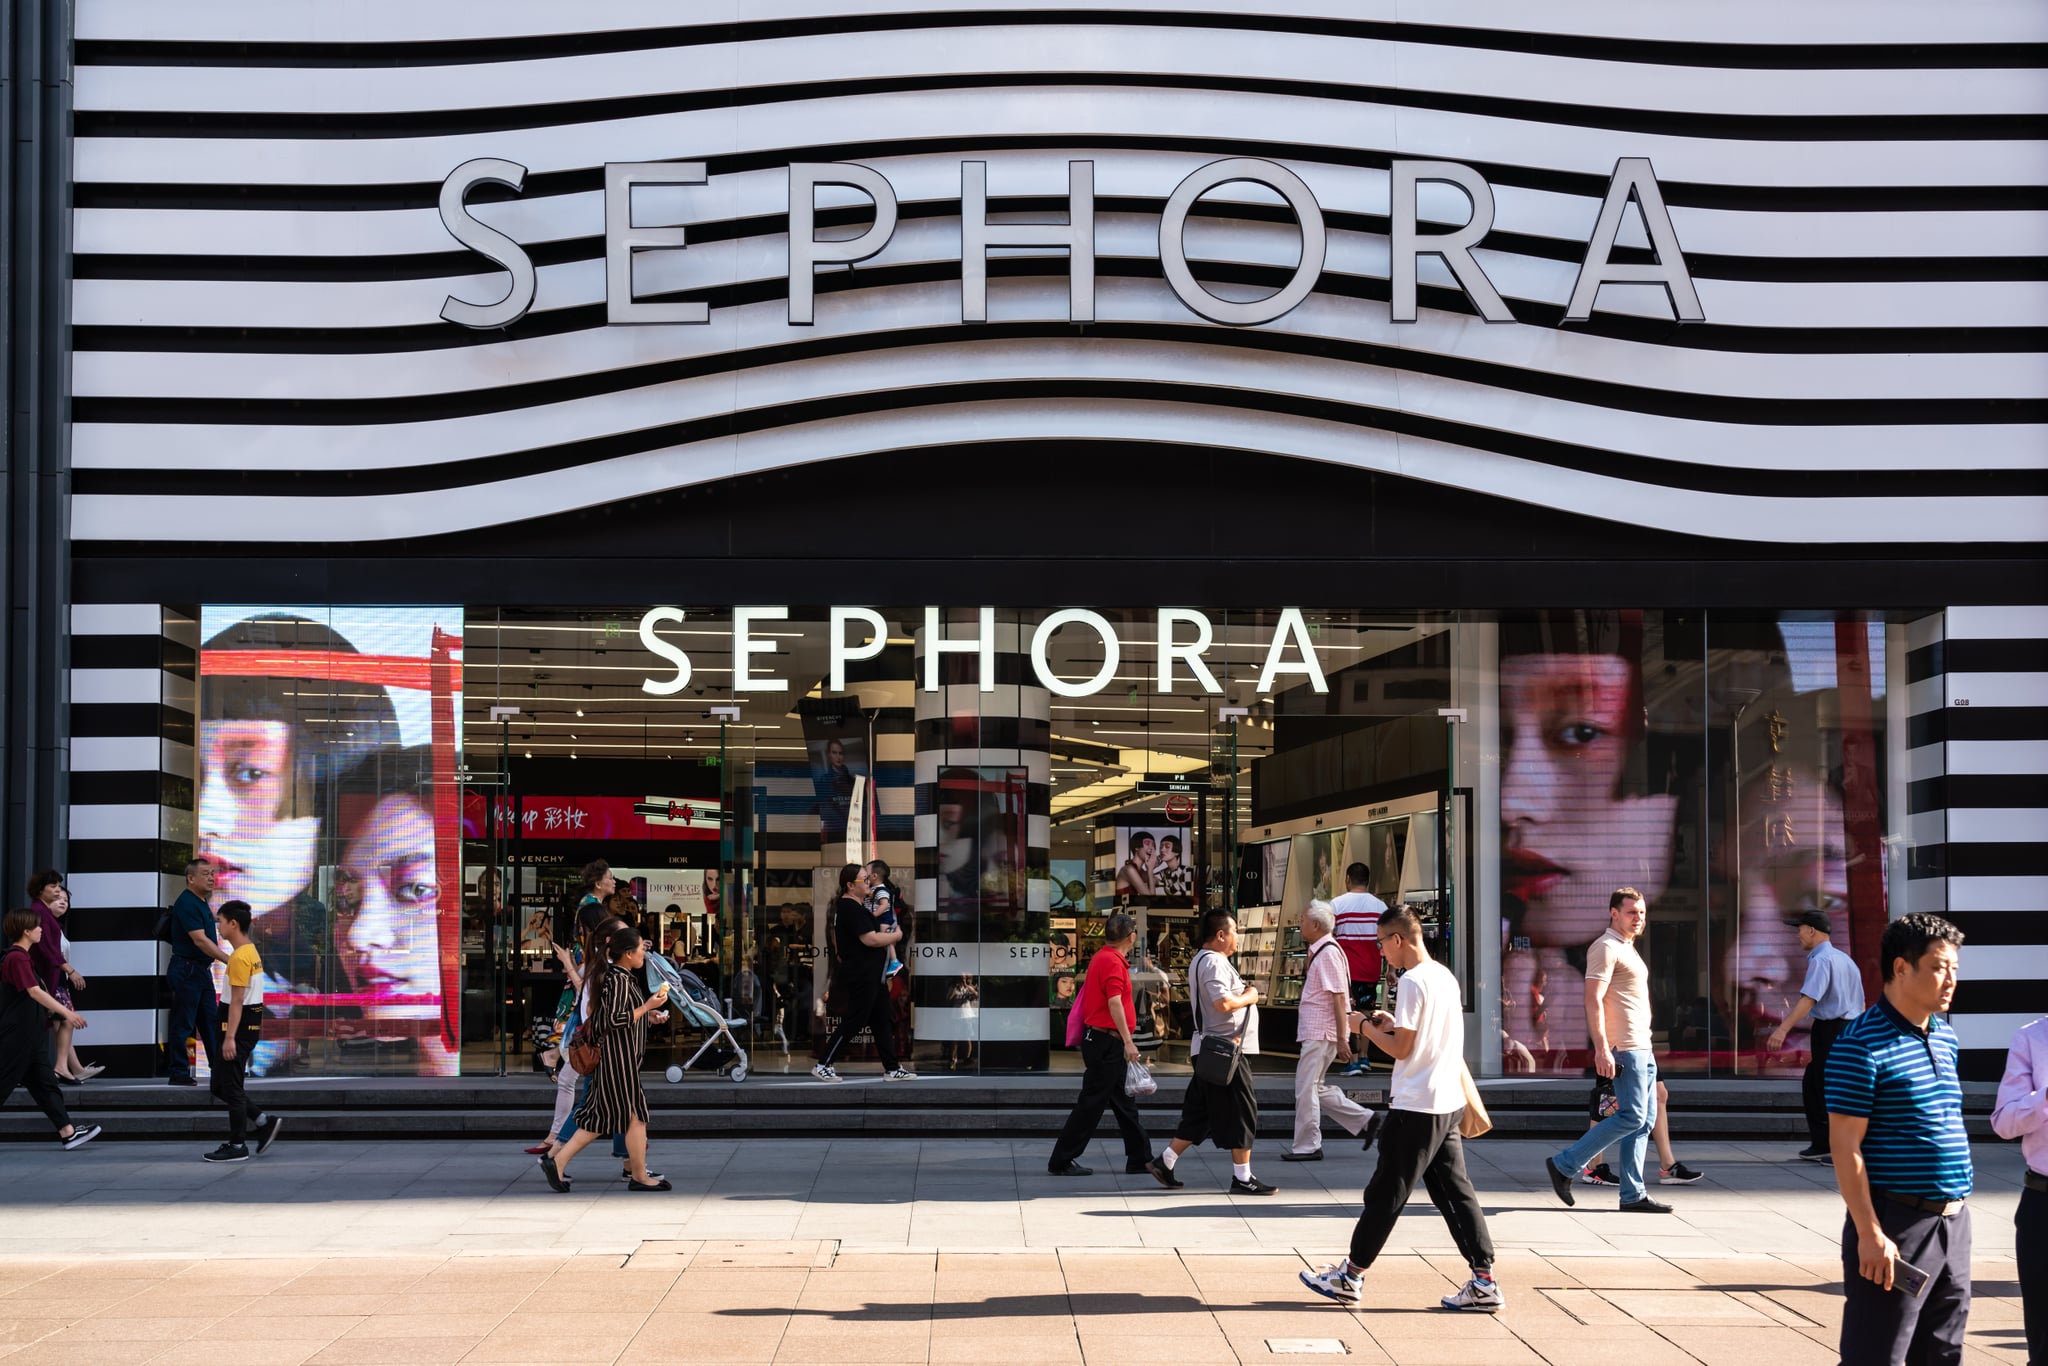 SHANGHAI, CHINA - 2019/09/20: Pedestrians walk past a Sephora outlet on East Nanjing Road in Shanghai. A French multinational chain of personal care and beauty stores. (Photo by Alex Tai/SOPA Images/LightRocket via Getty Images)